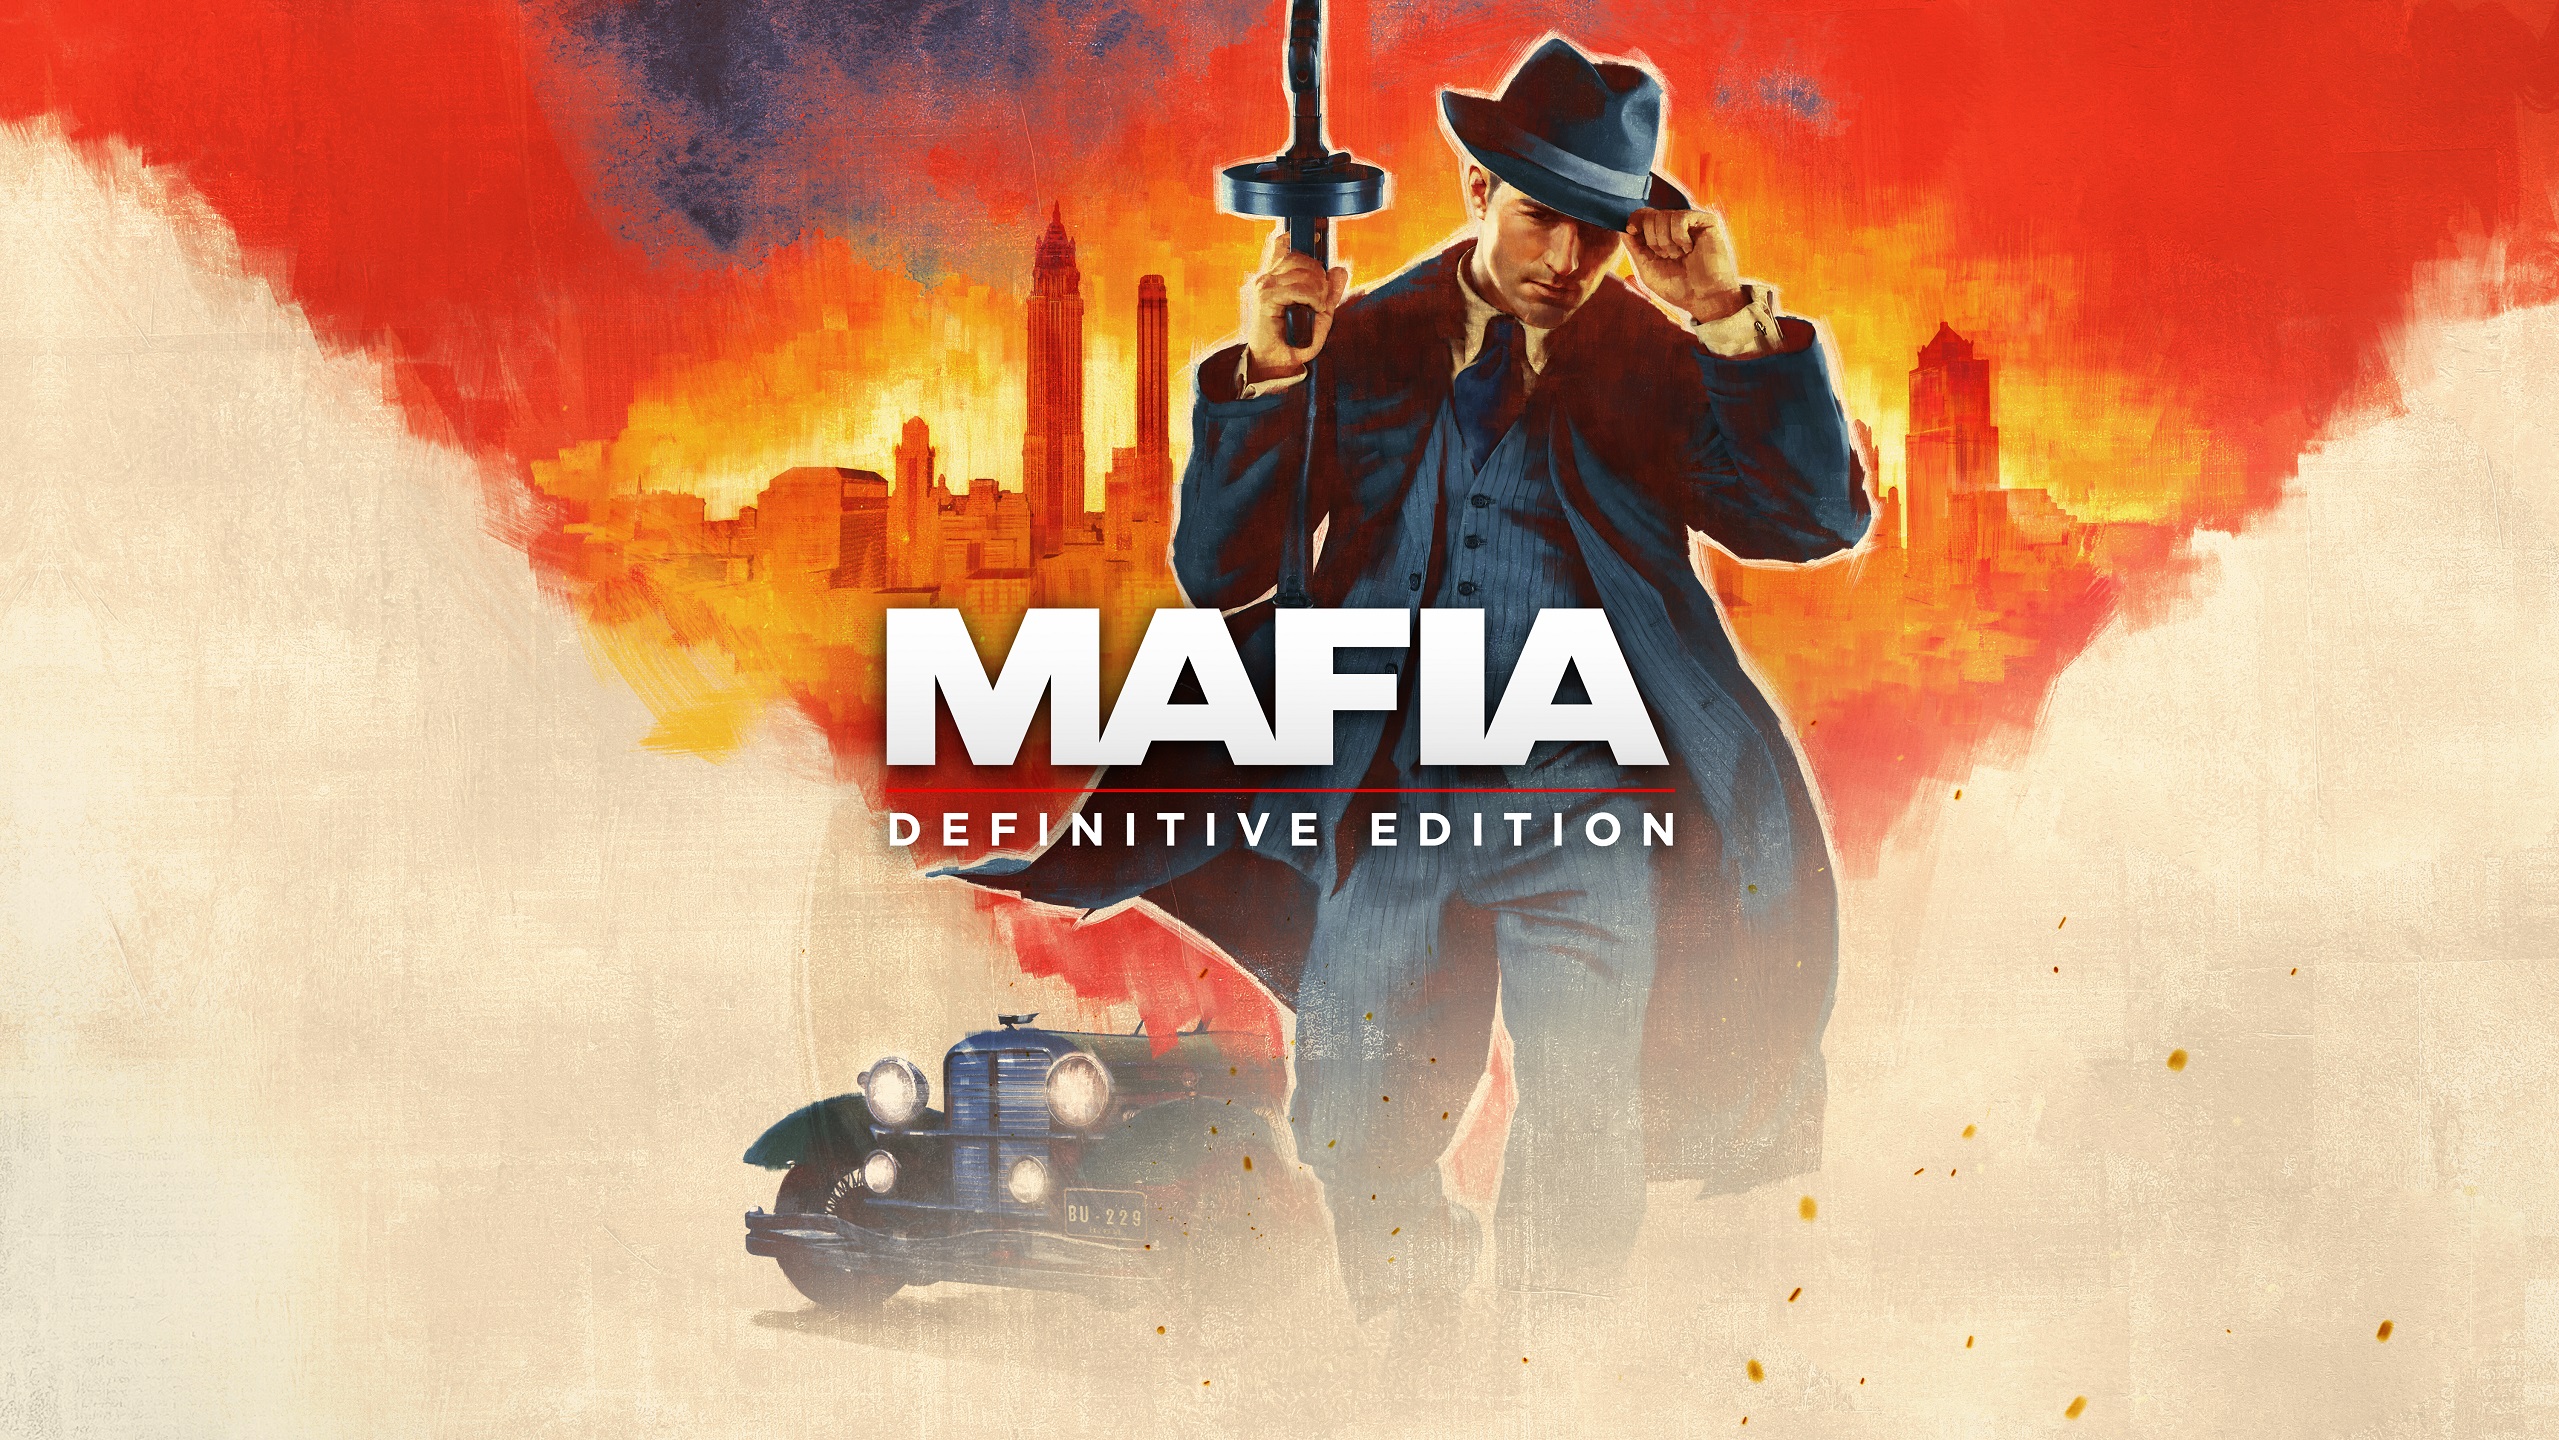 Mafia: Definitive Edition Hands-On Preview